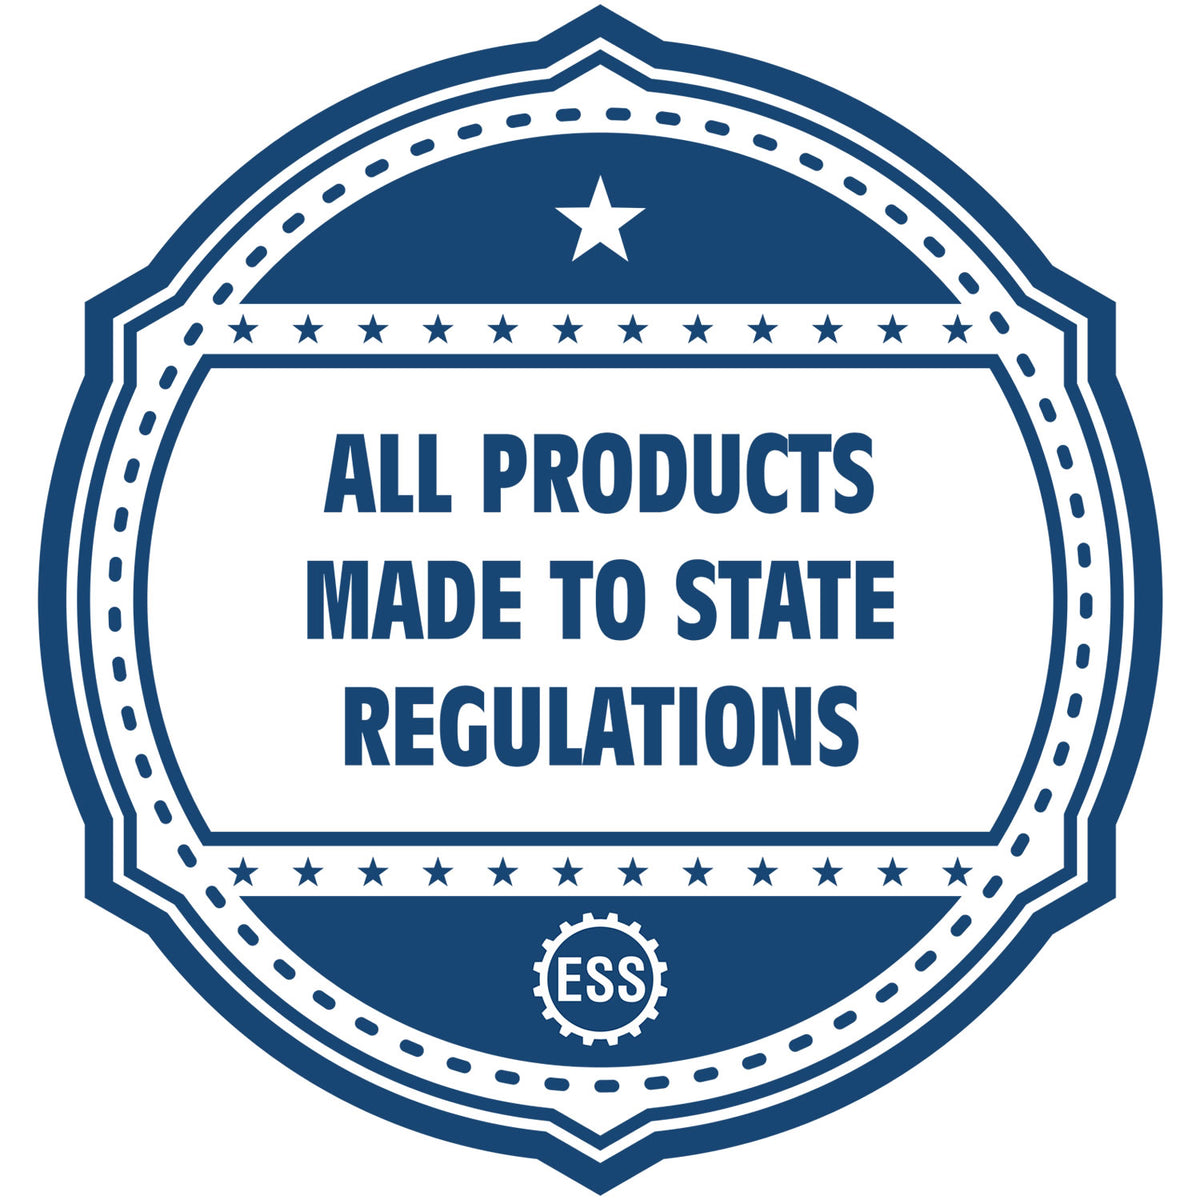 An icon or badge element for the Self-Inking Wyoming Landscape Architect Stamp showing that this product is made in compliance with state regulations.